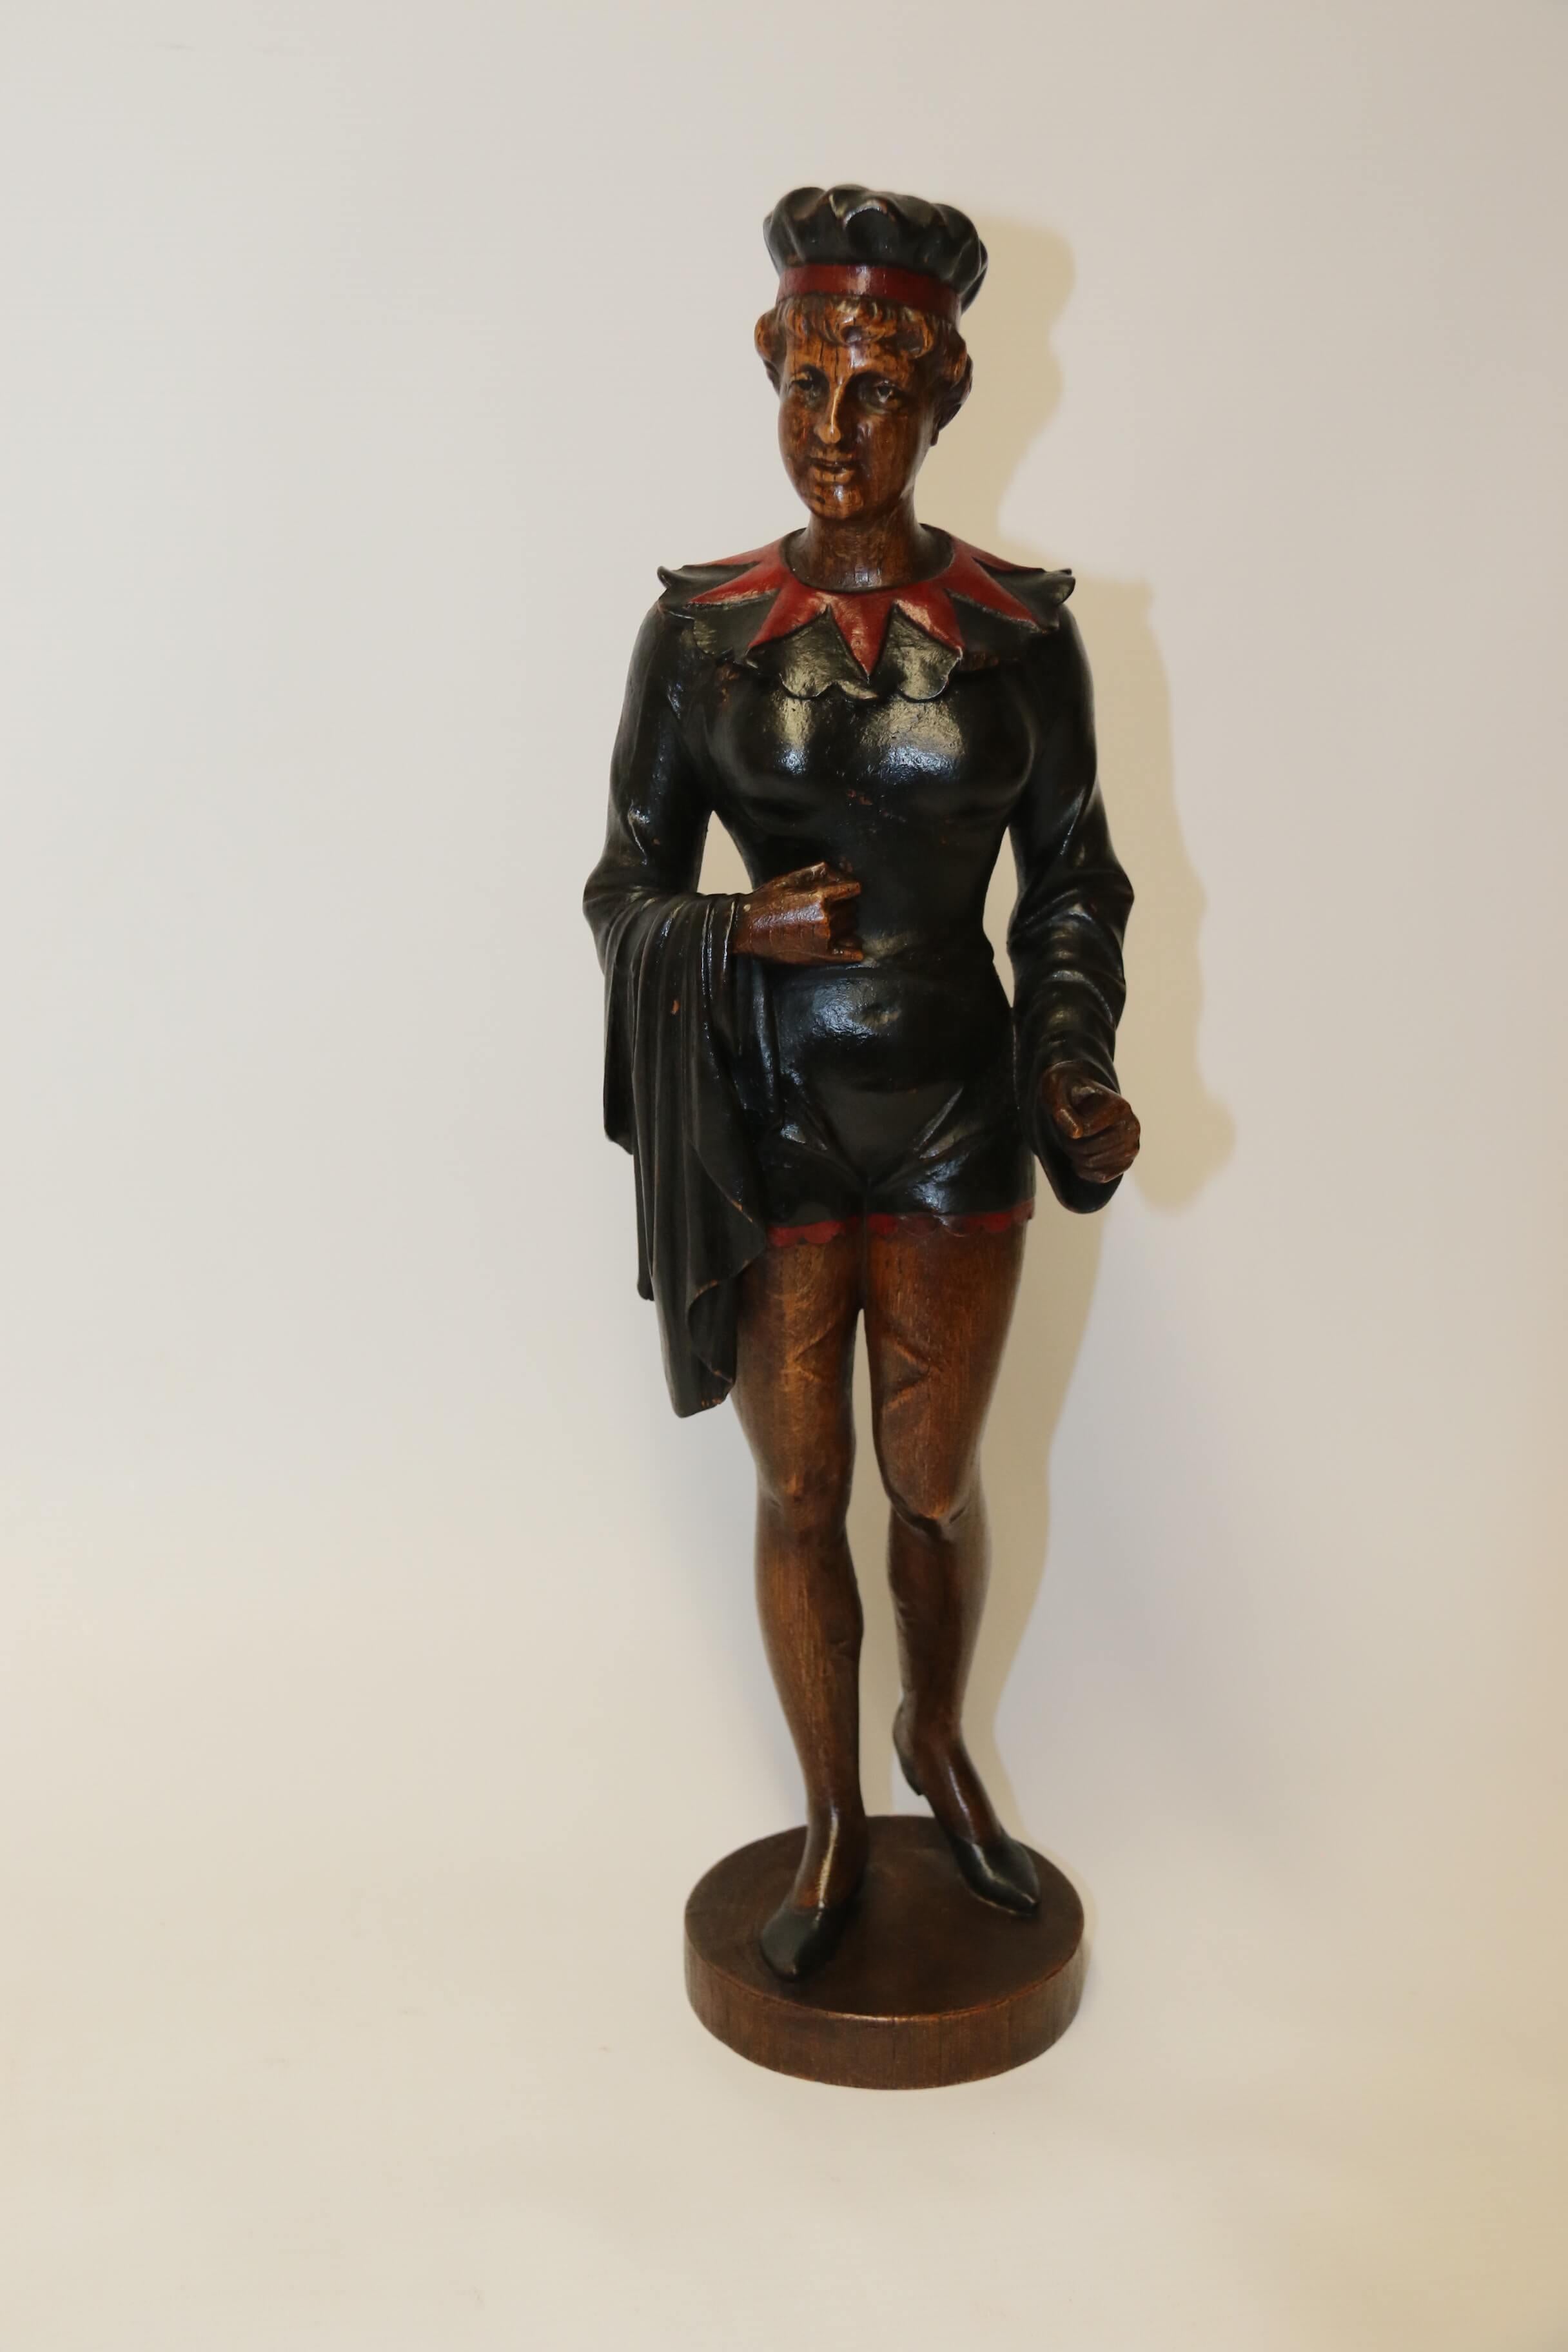 Carved in English oak this rather unusual and quirky figure depicts a Victorian actress dressed in theatre costume.
She has polychrome decoration in black and red.
The carver has inscribed his initials CVR and the date 1893 are on the reverse of